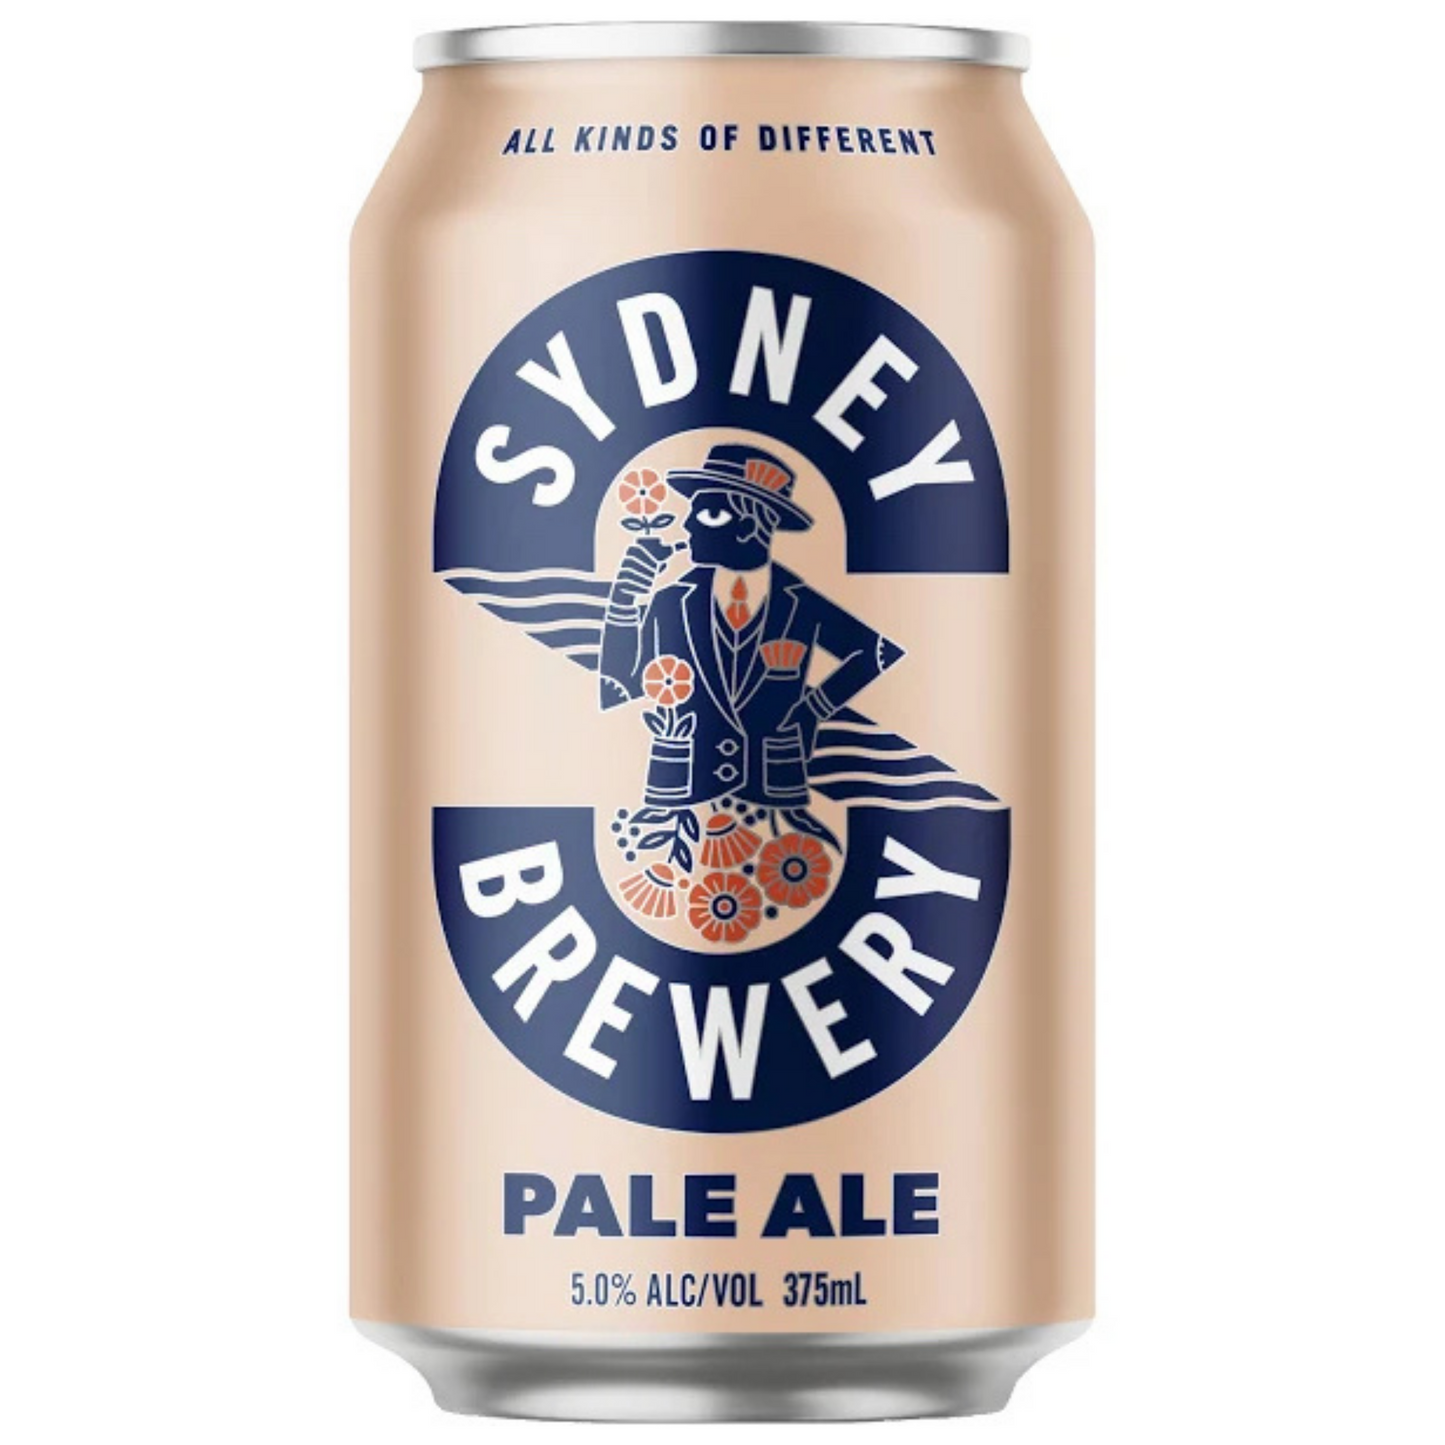 Sydney Brewery Craft Beer Pale Ale 4x375mL cans